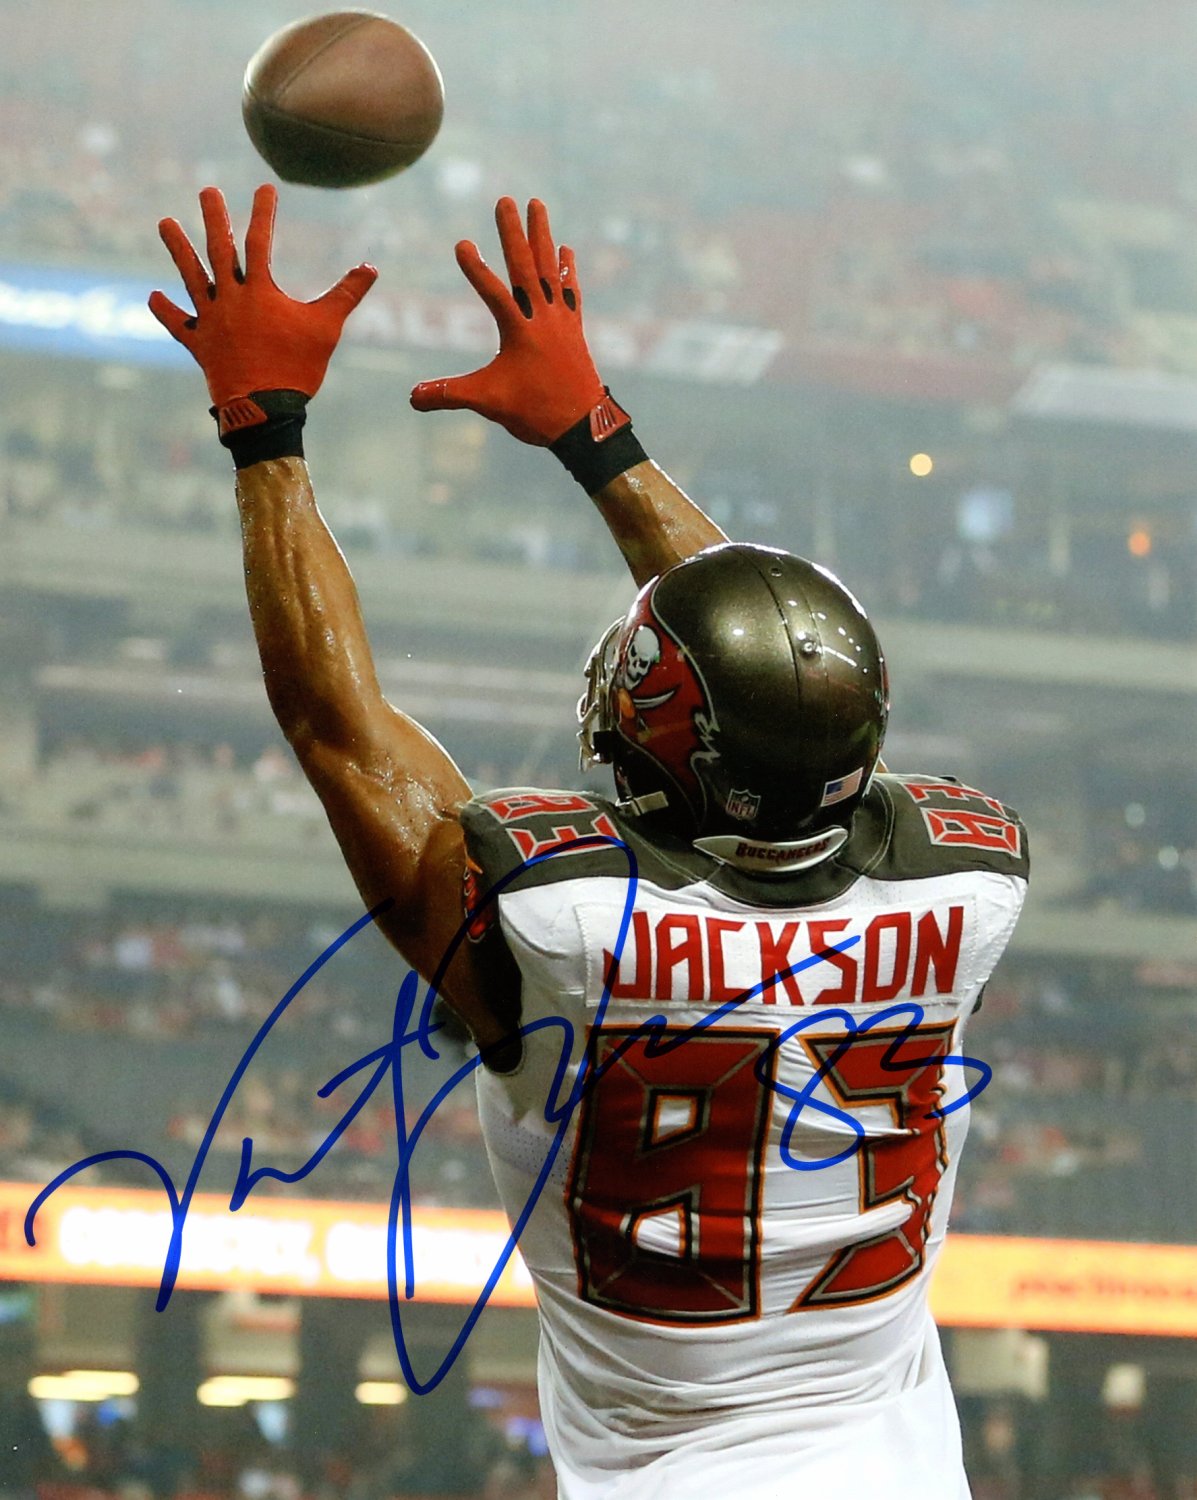 Vincent Jackson Tampa Bay Buccaneers Autographed Signed 8x10 Photo